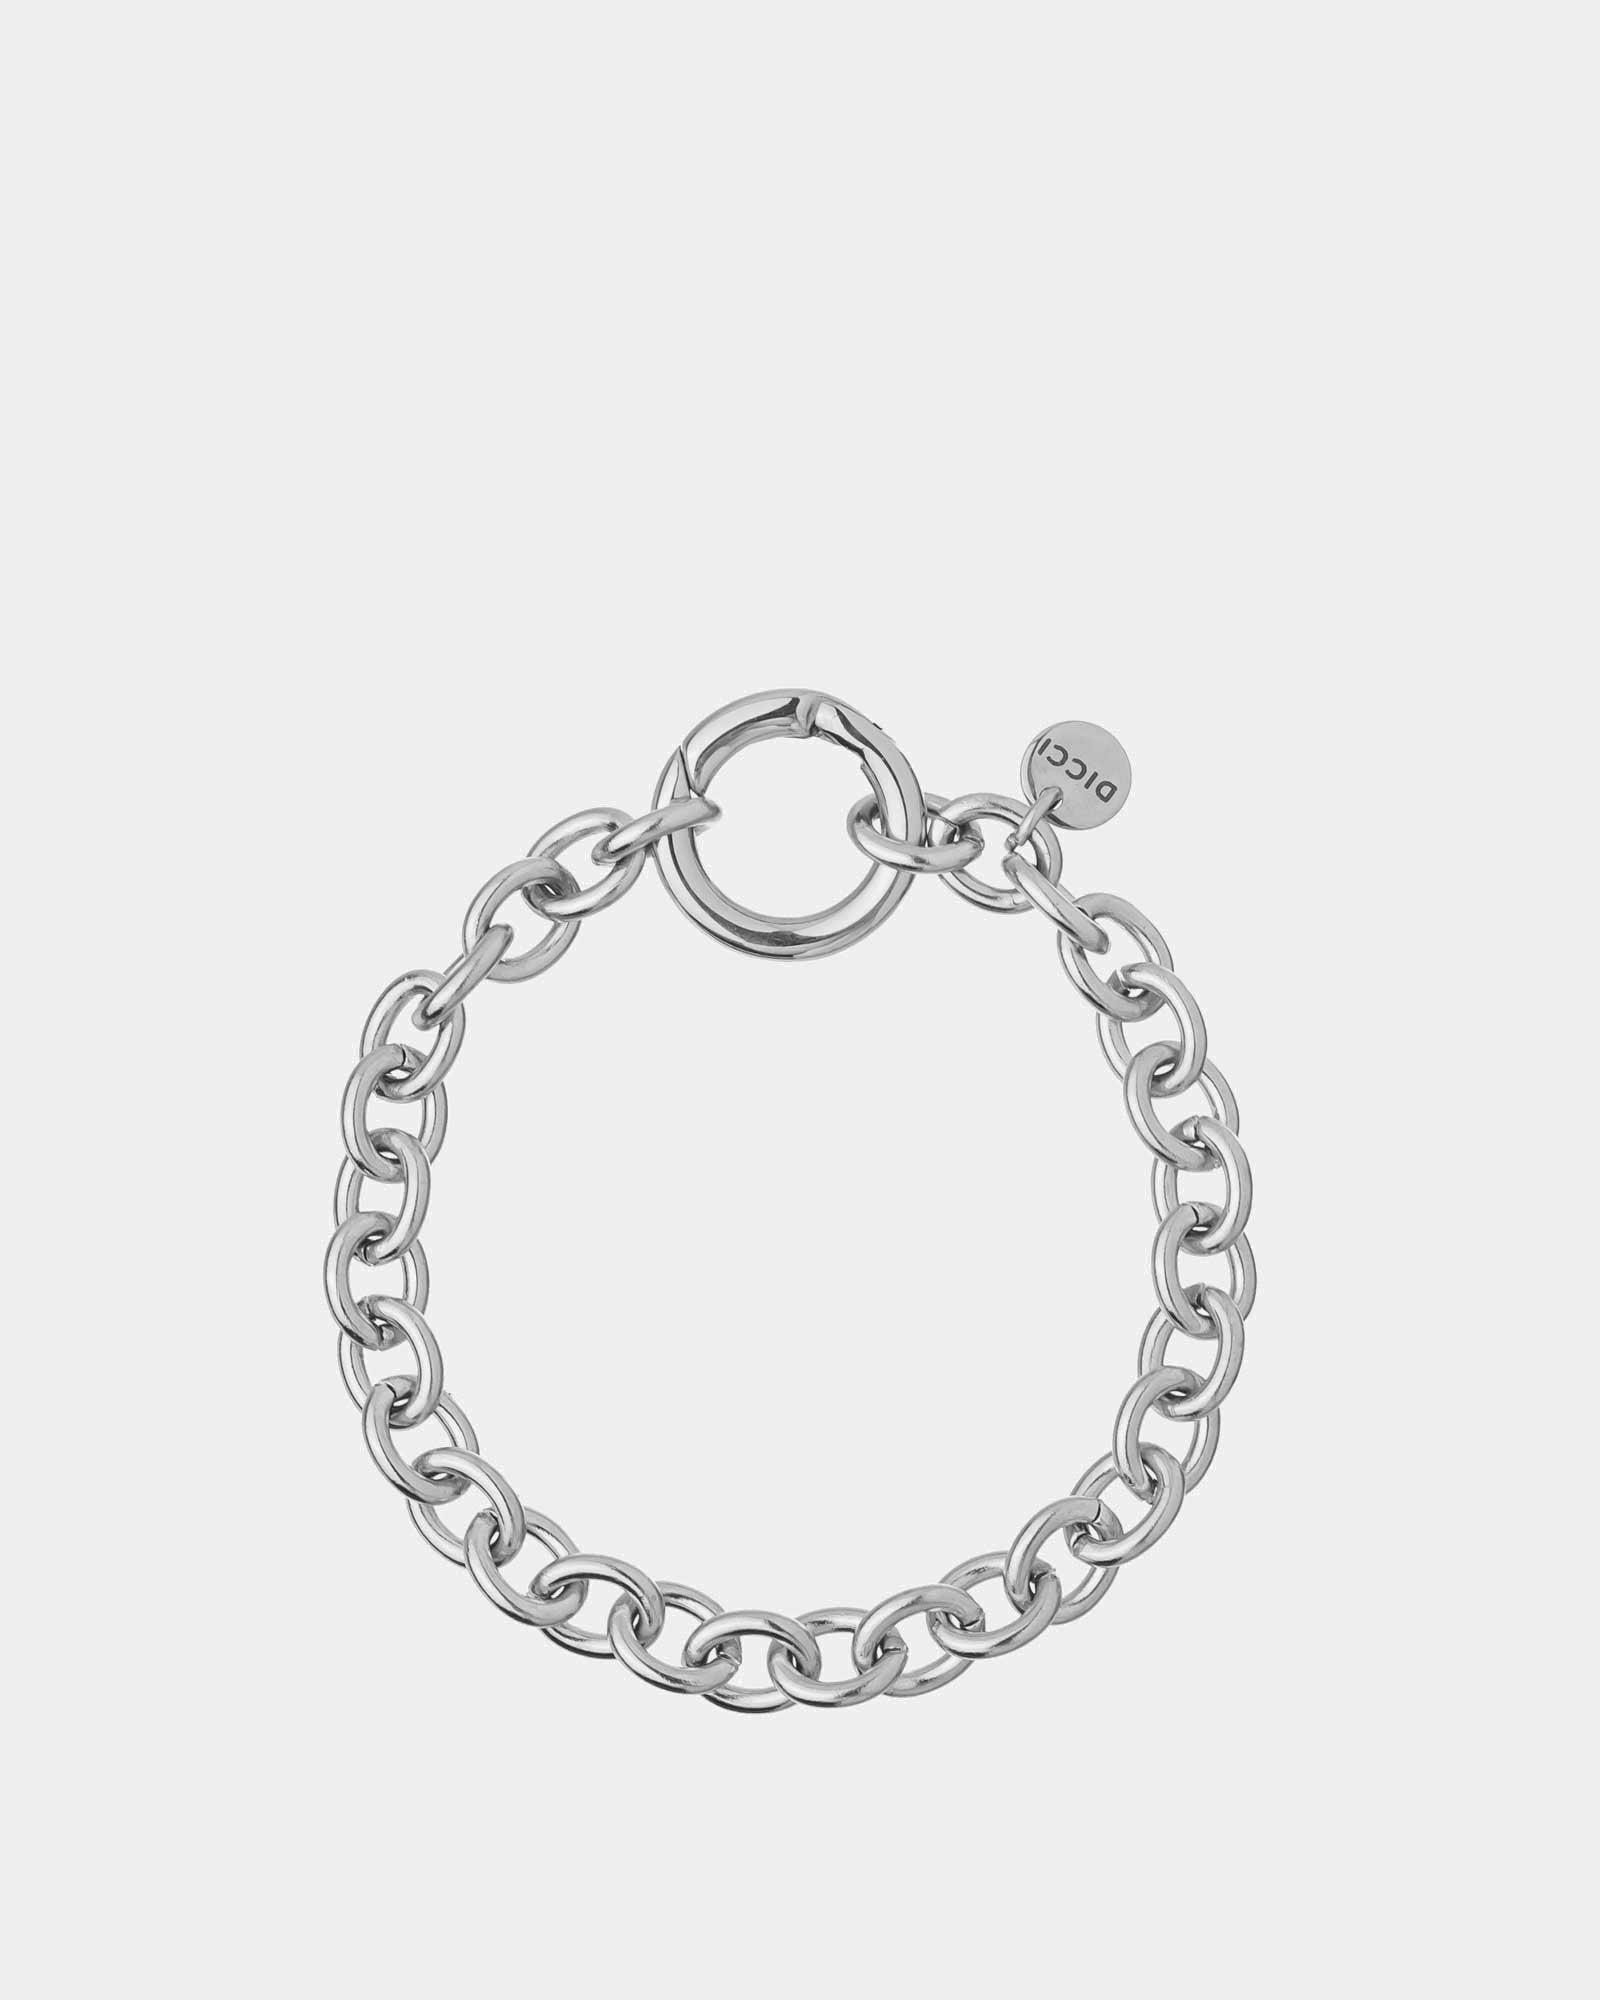 Ring Bracelet - Silver Stainless Steel - Online Unissex Jewelry - Dicci